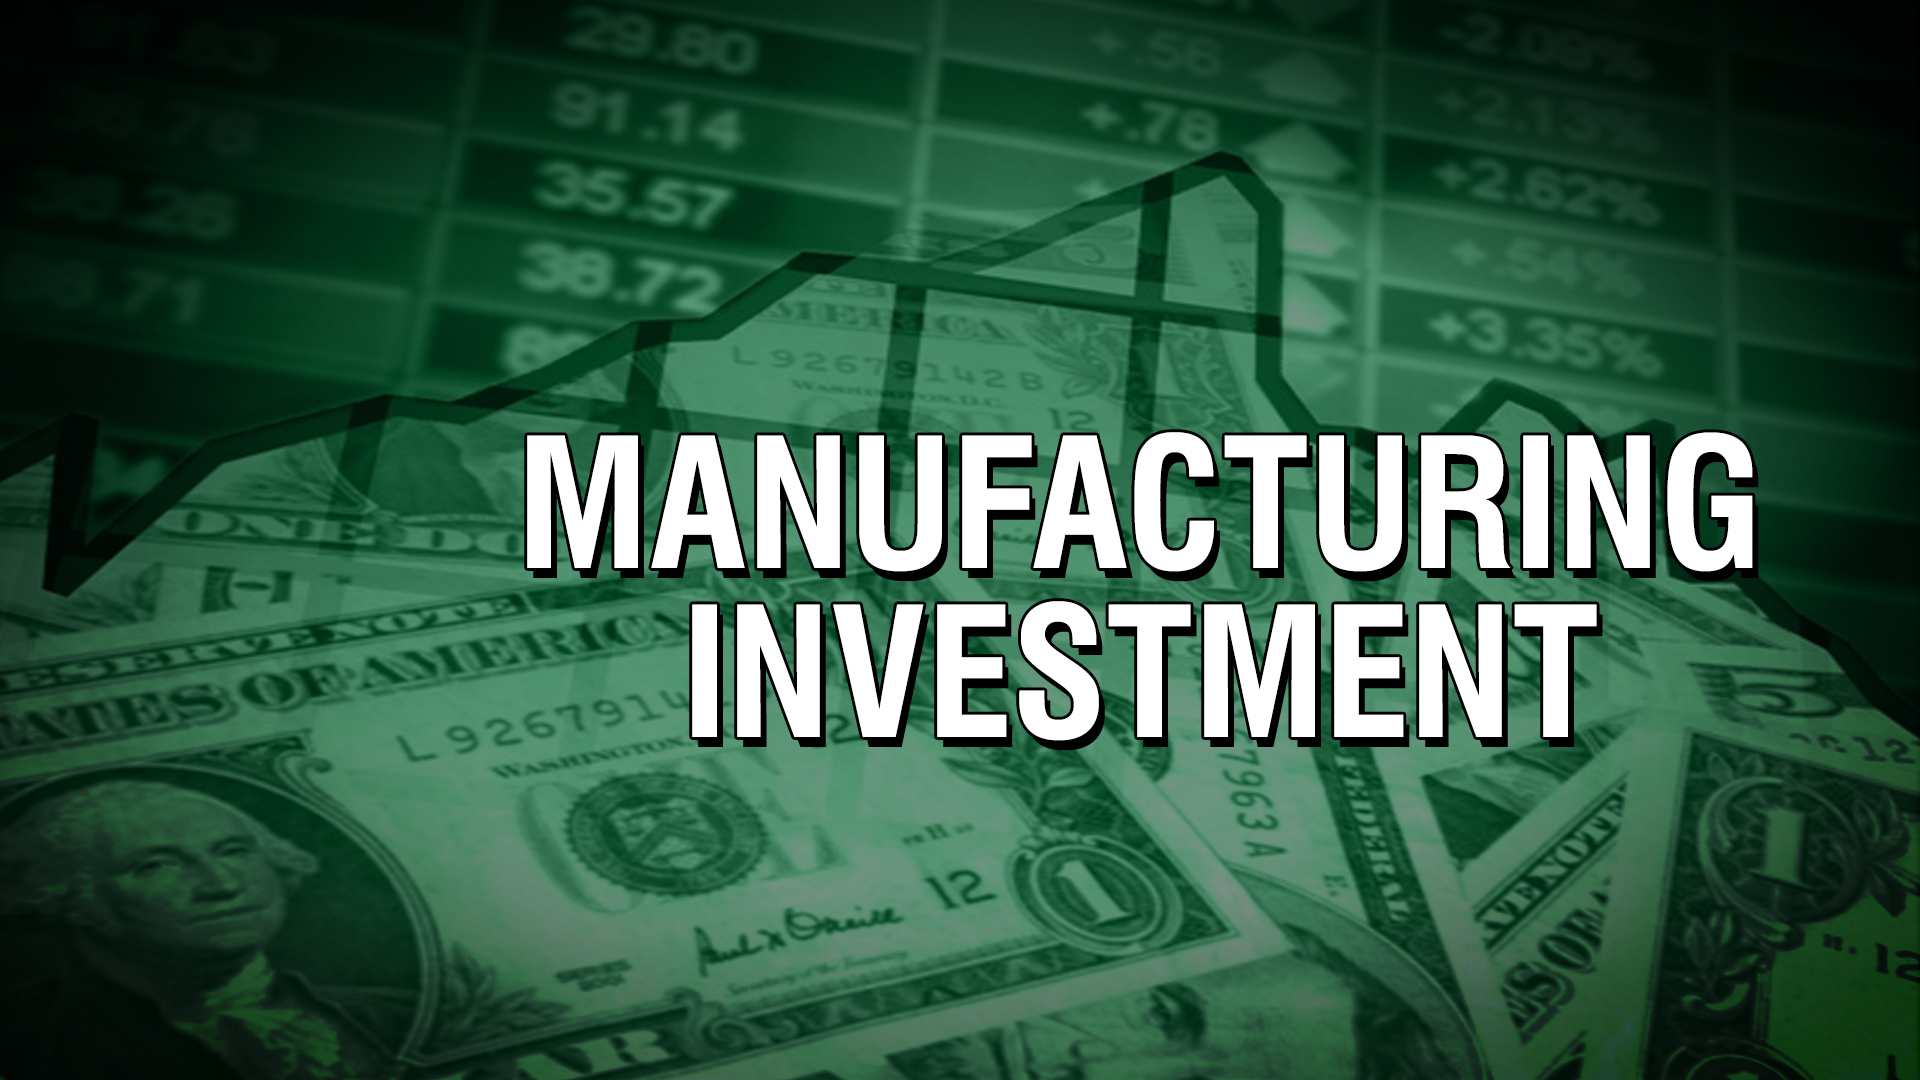 fbam-manufacturing-investment-1